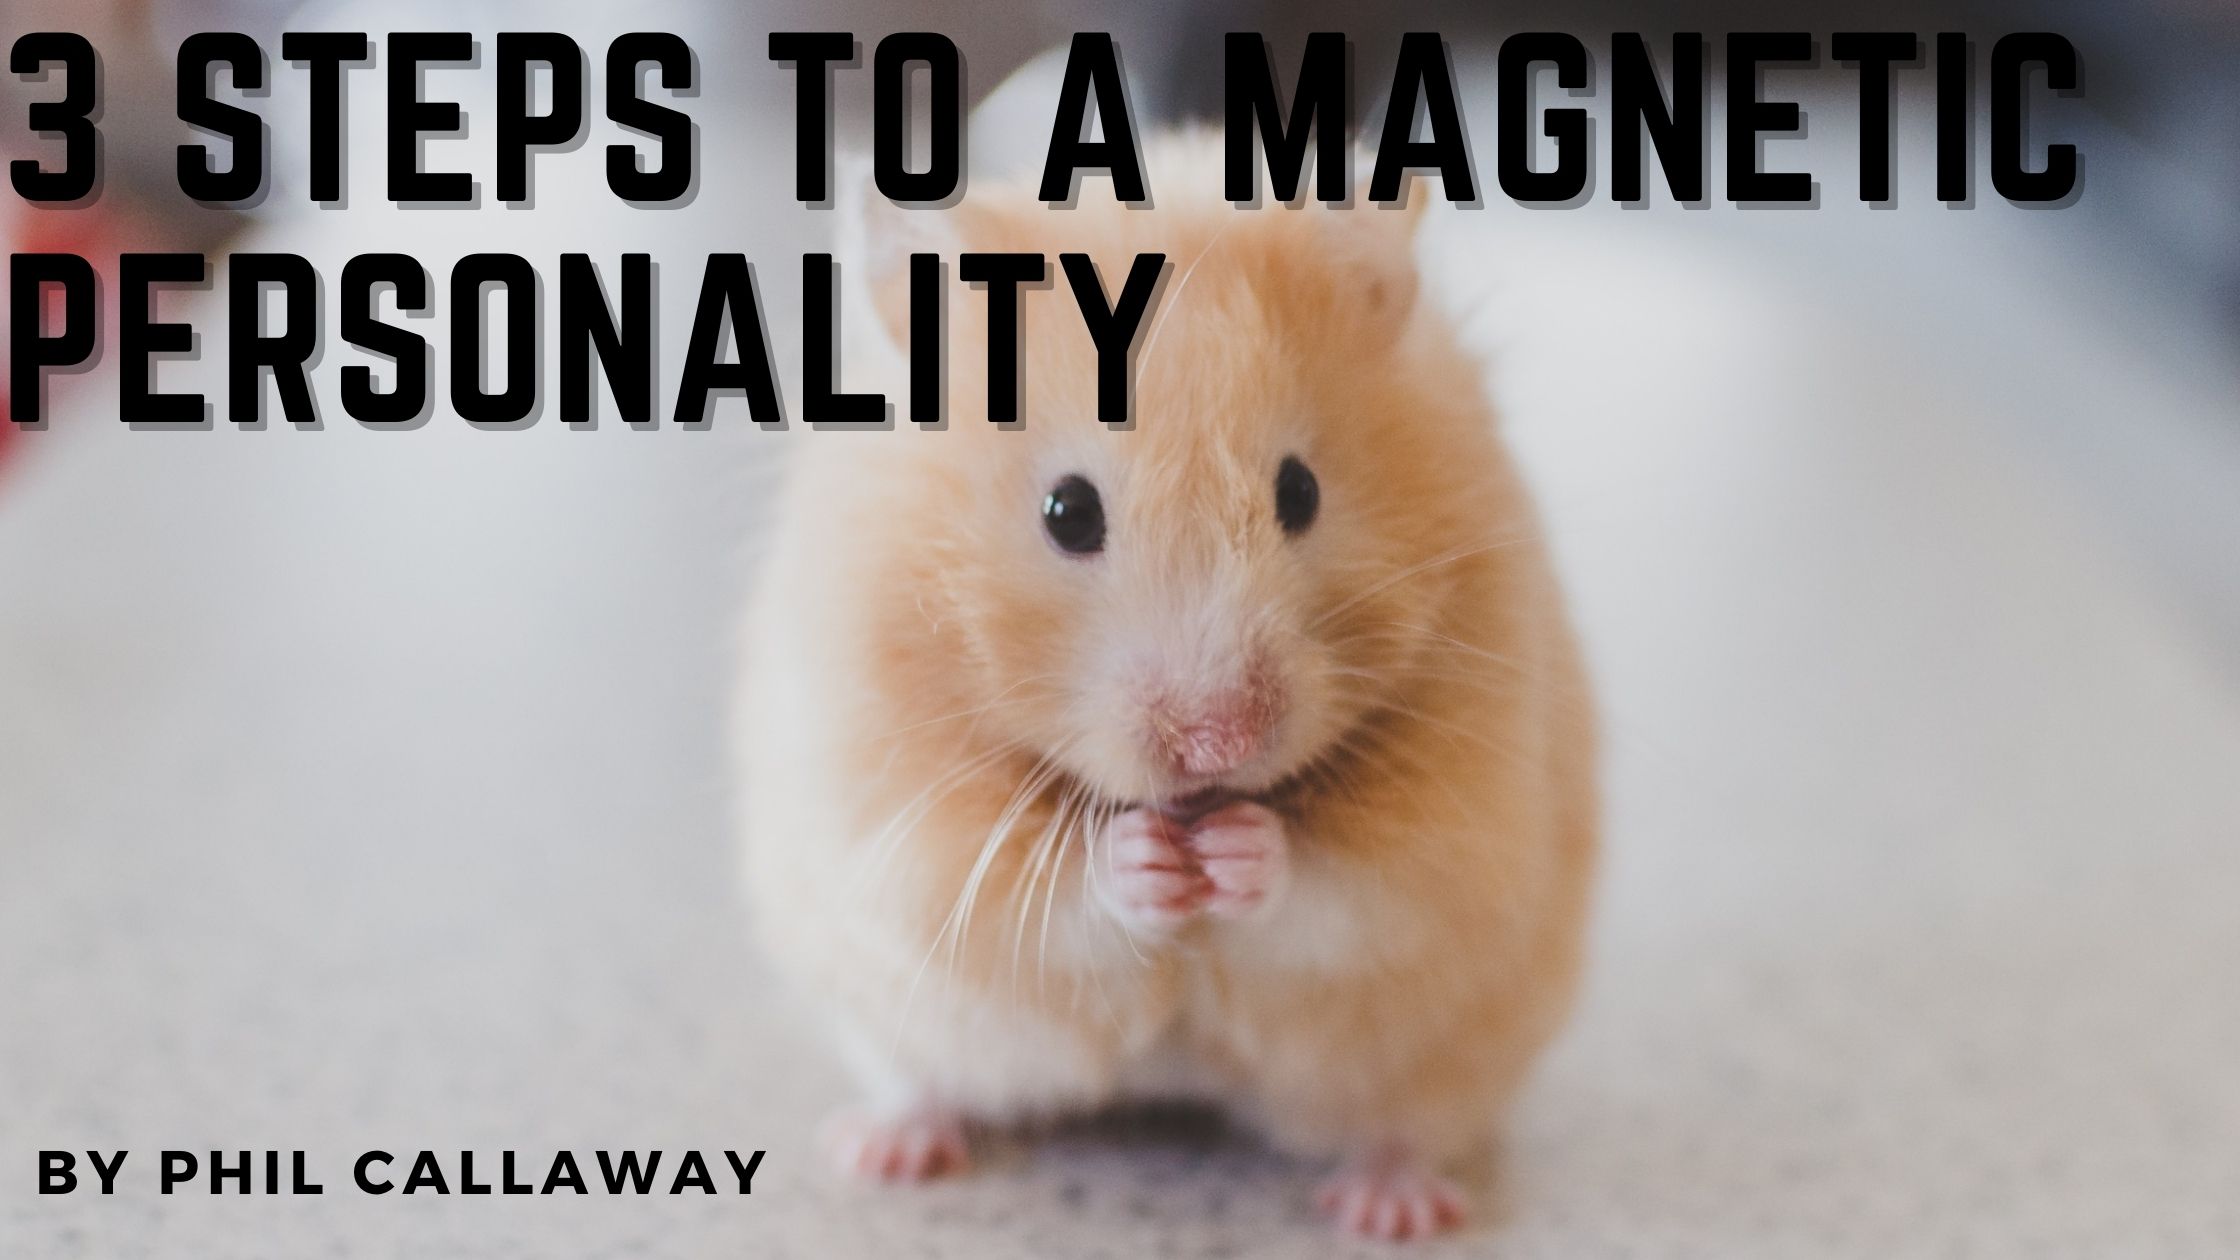 3 Steps to a Magnetic Personality